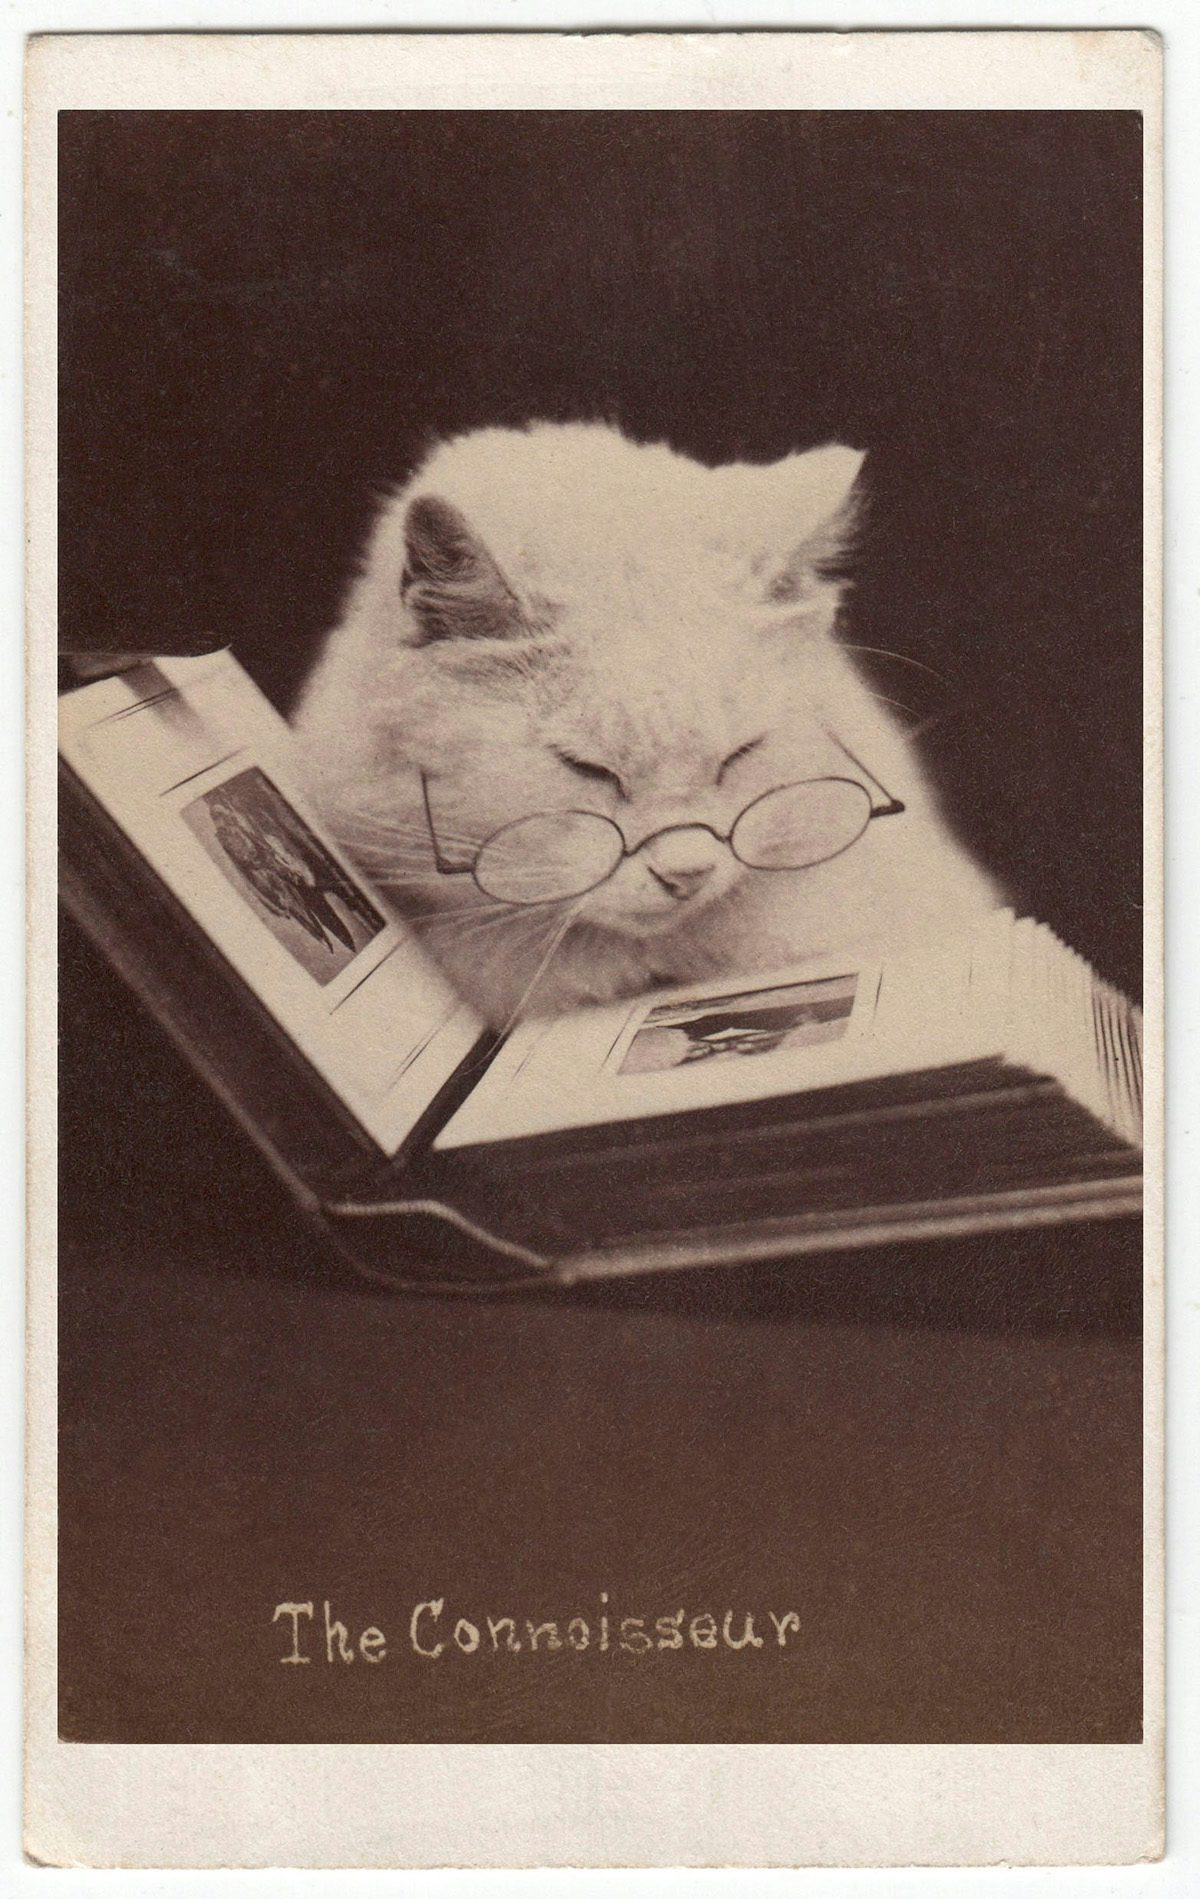 Sepia toned photo of a cat wearing glasses appaering to read a book